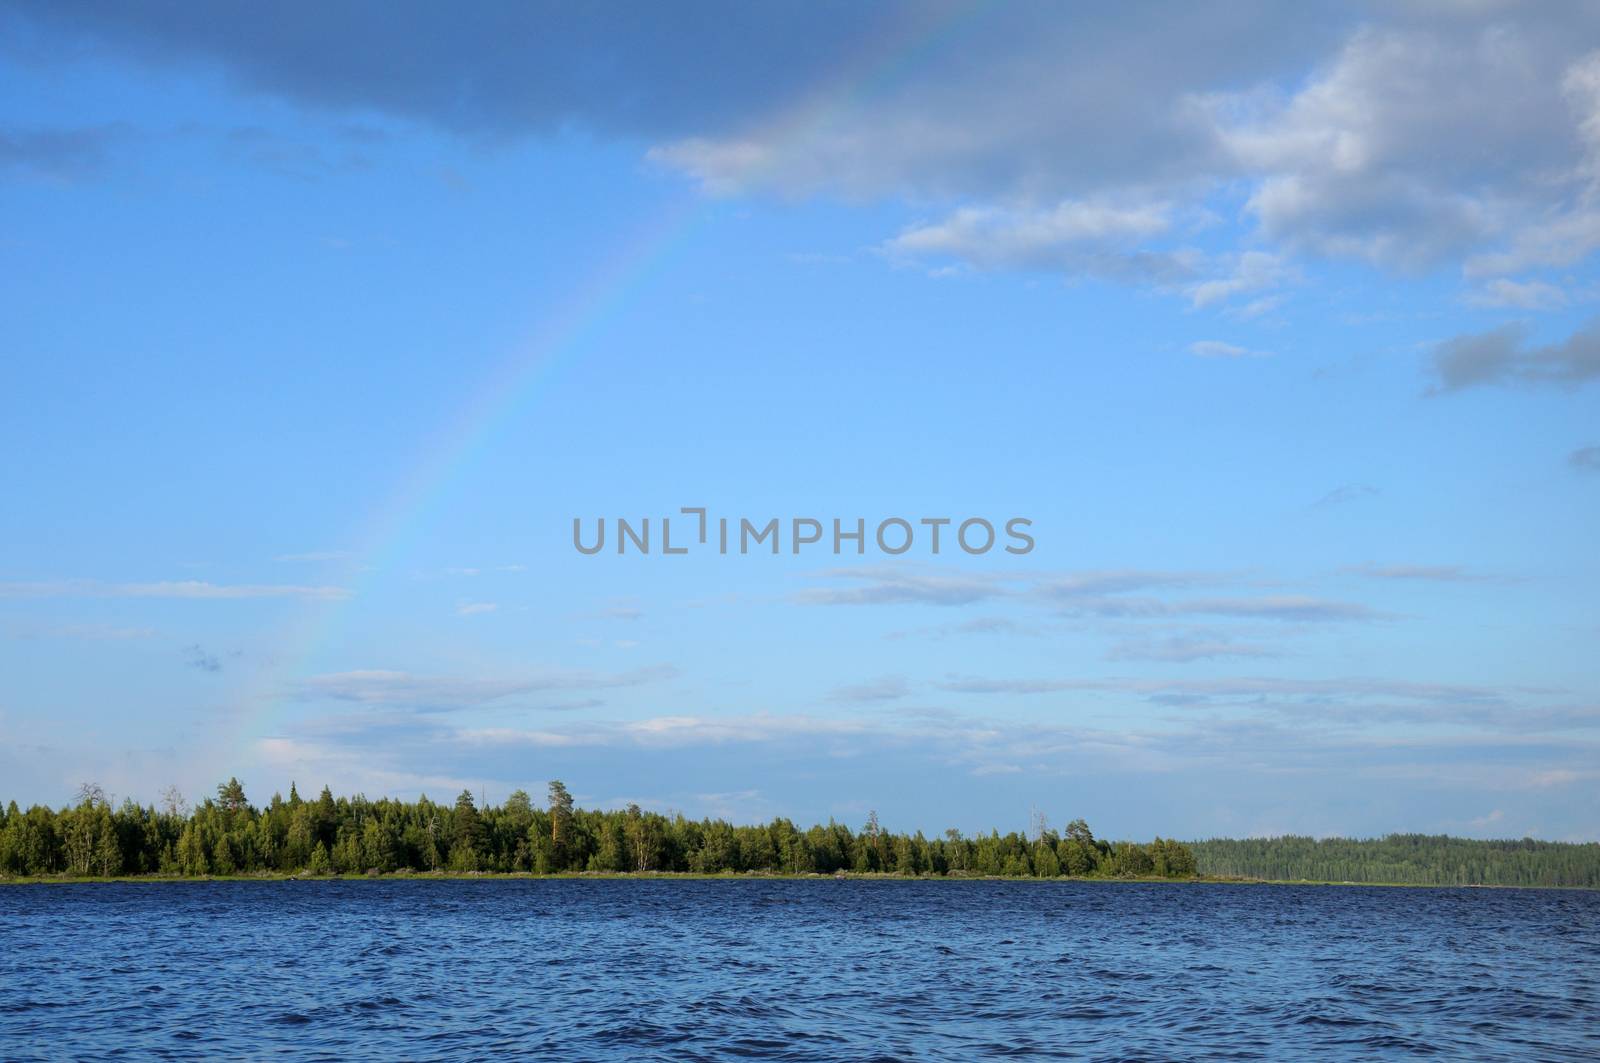 Video shows saturated and colorfull rainbow under single cloud in the sky over lake's surface